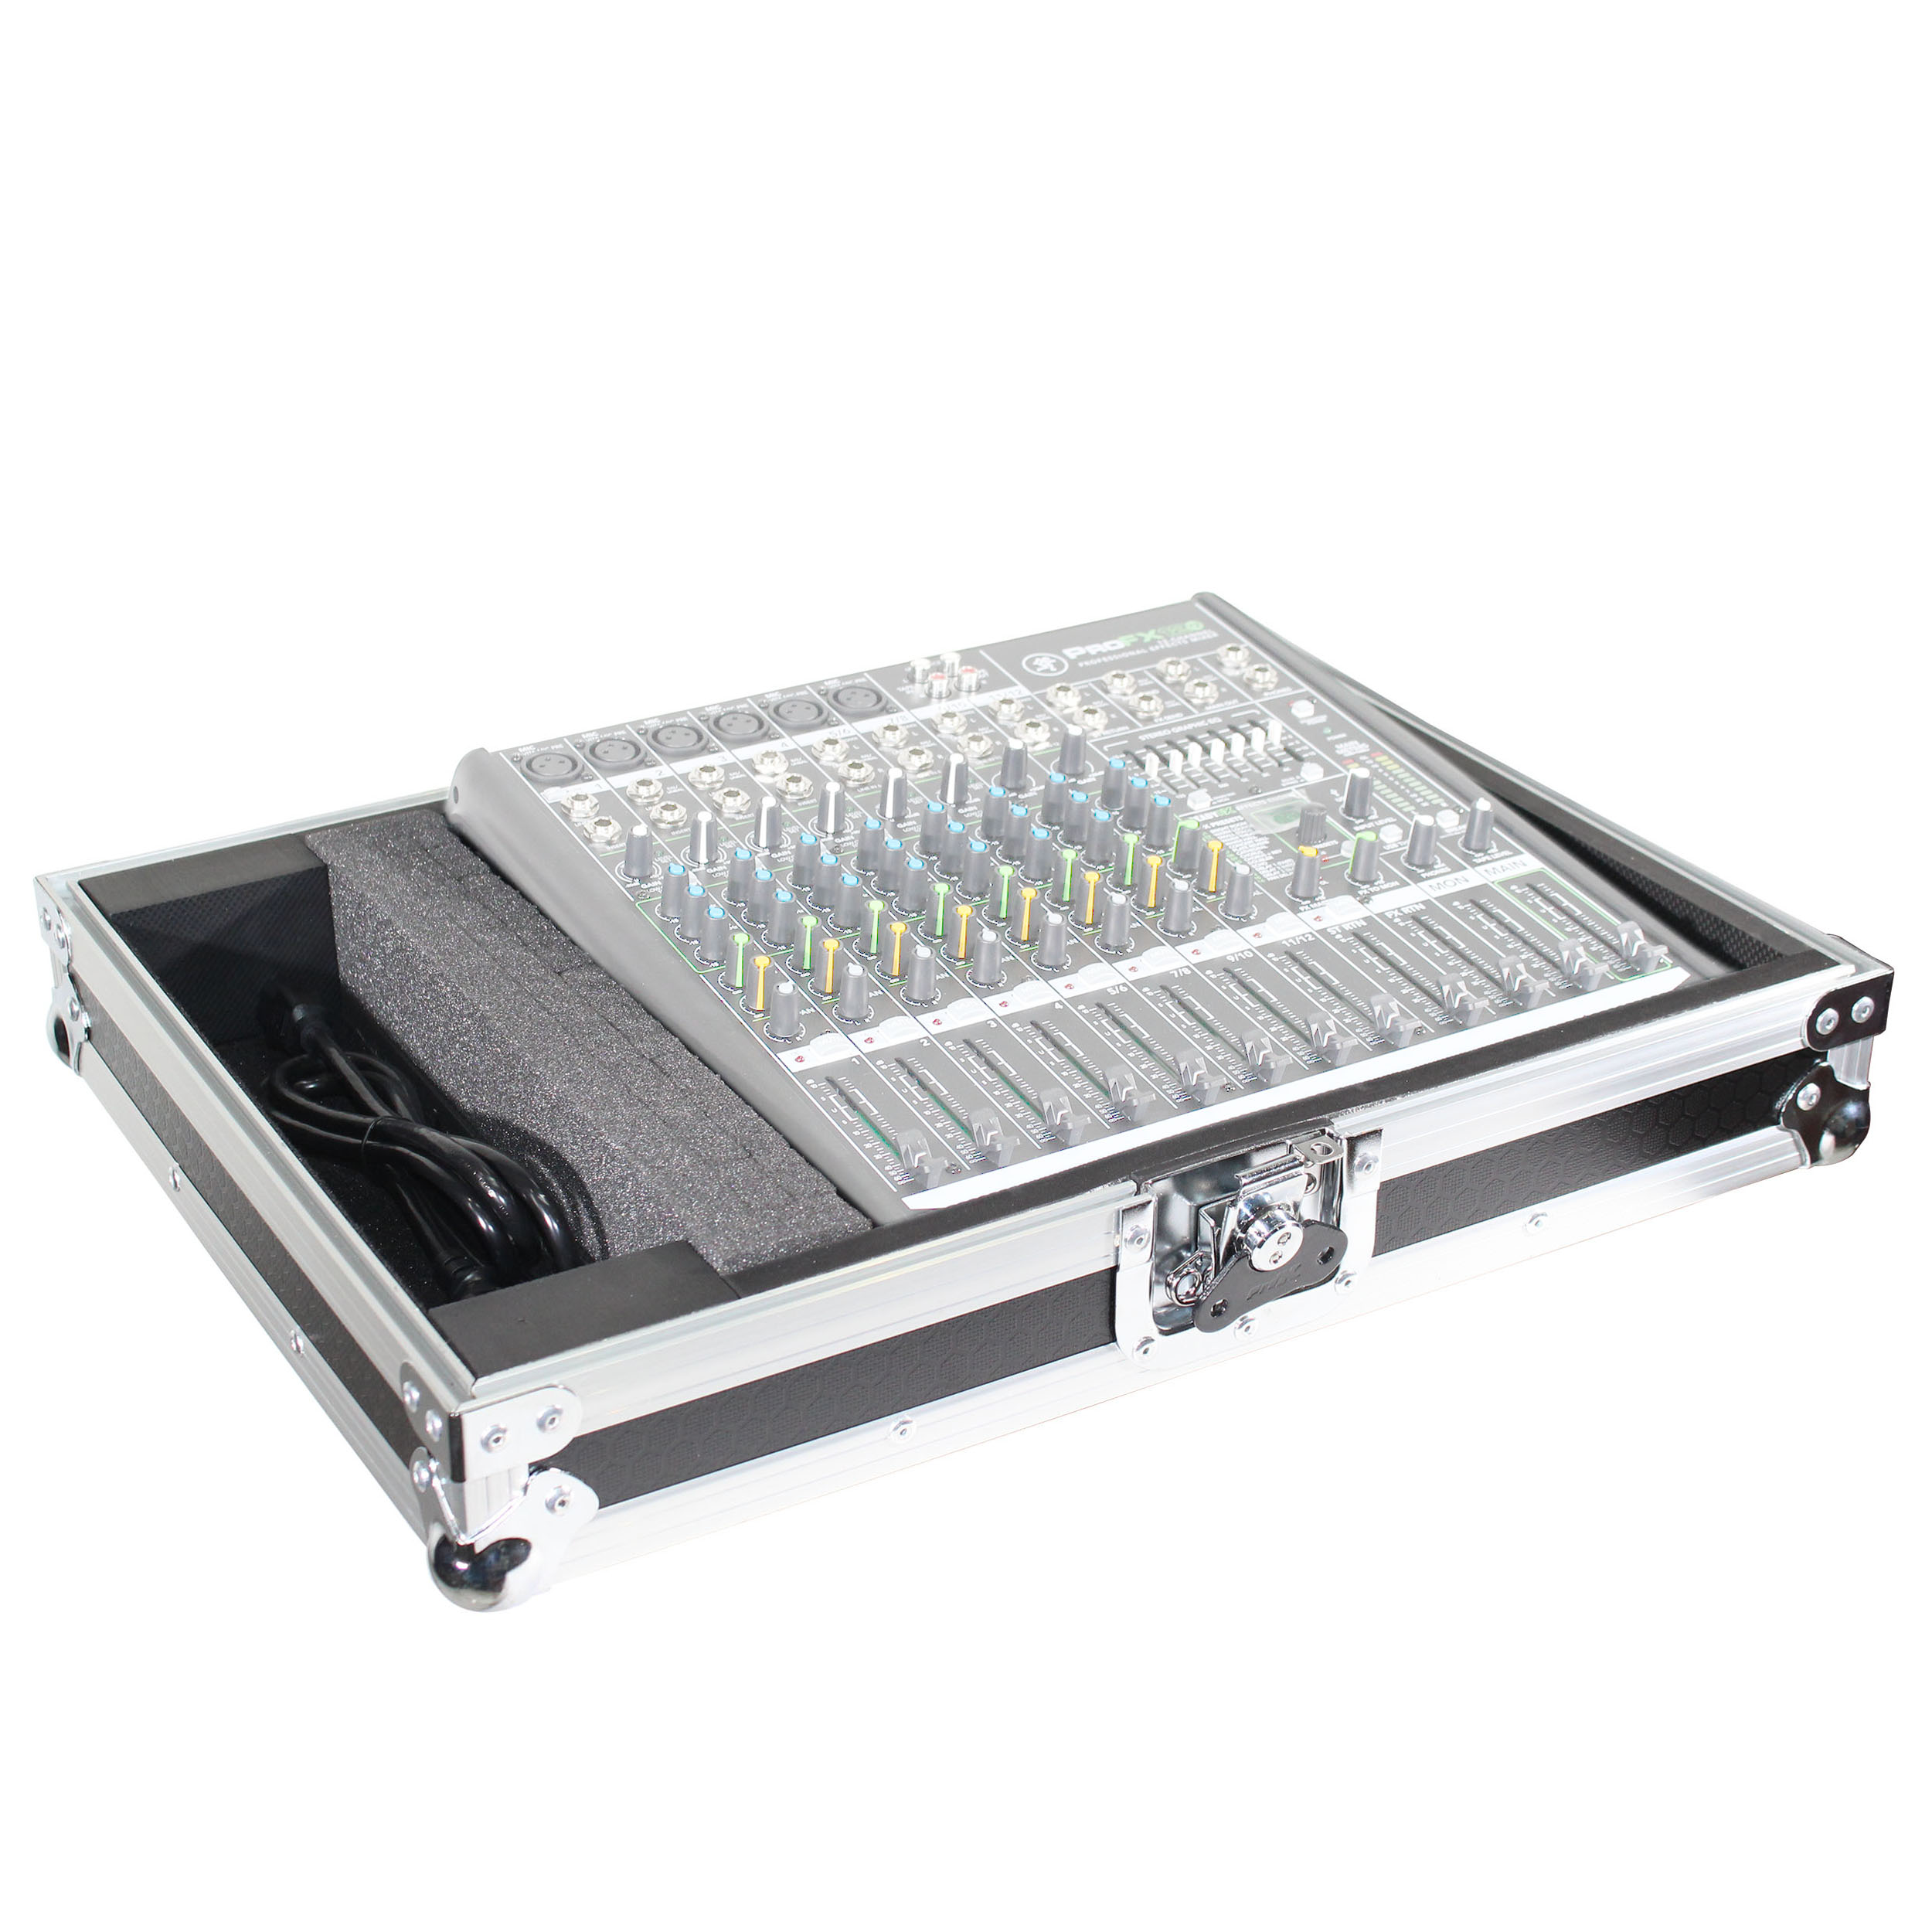 Mixers & Small Units 3/8 Ply Professional ATA Case with Diamond Plate Laminate Fits Mackie Ppm1012 PPM 1012 12 CHA 1600w 